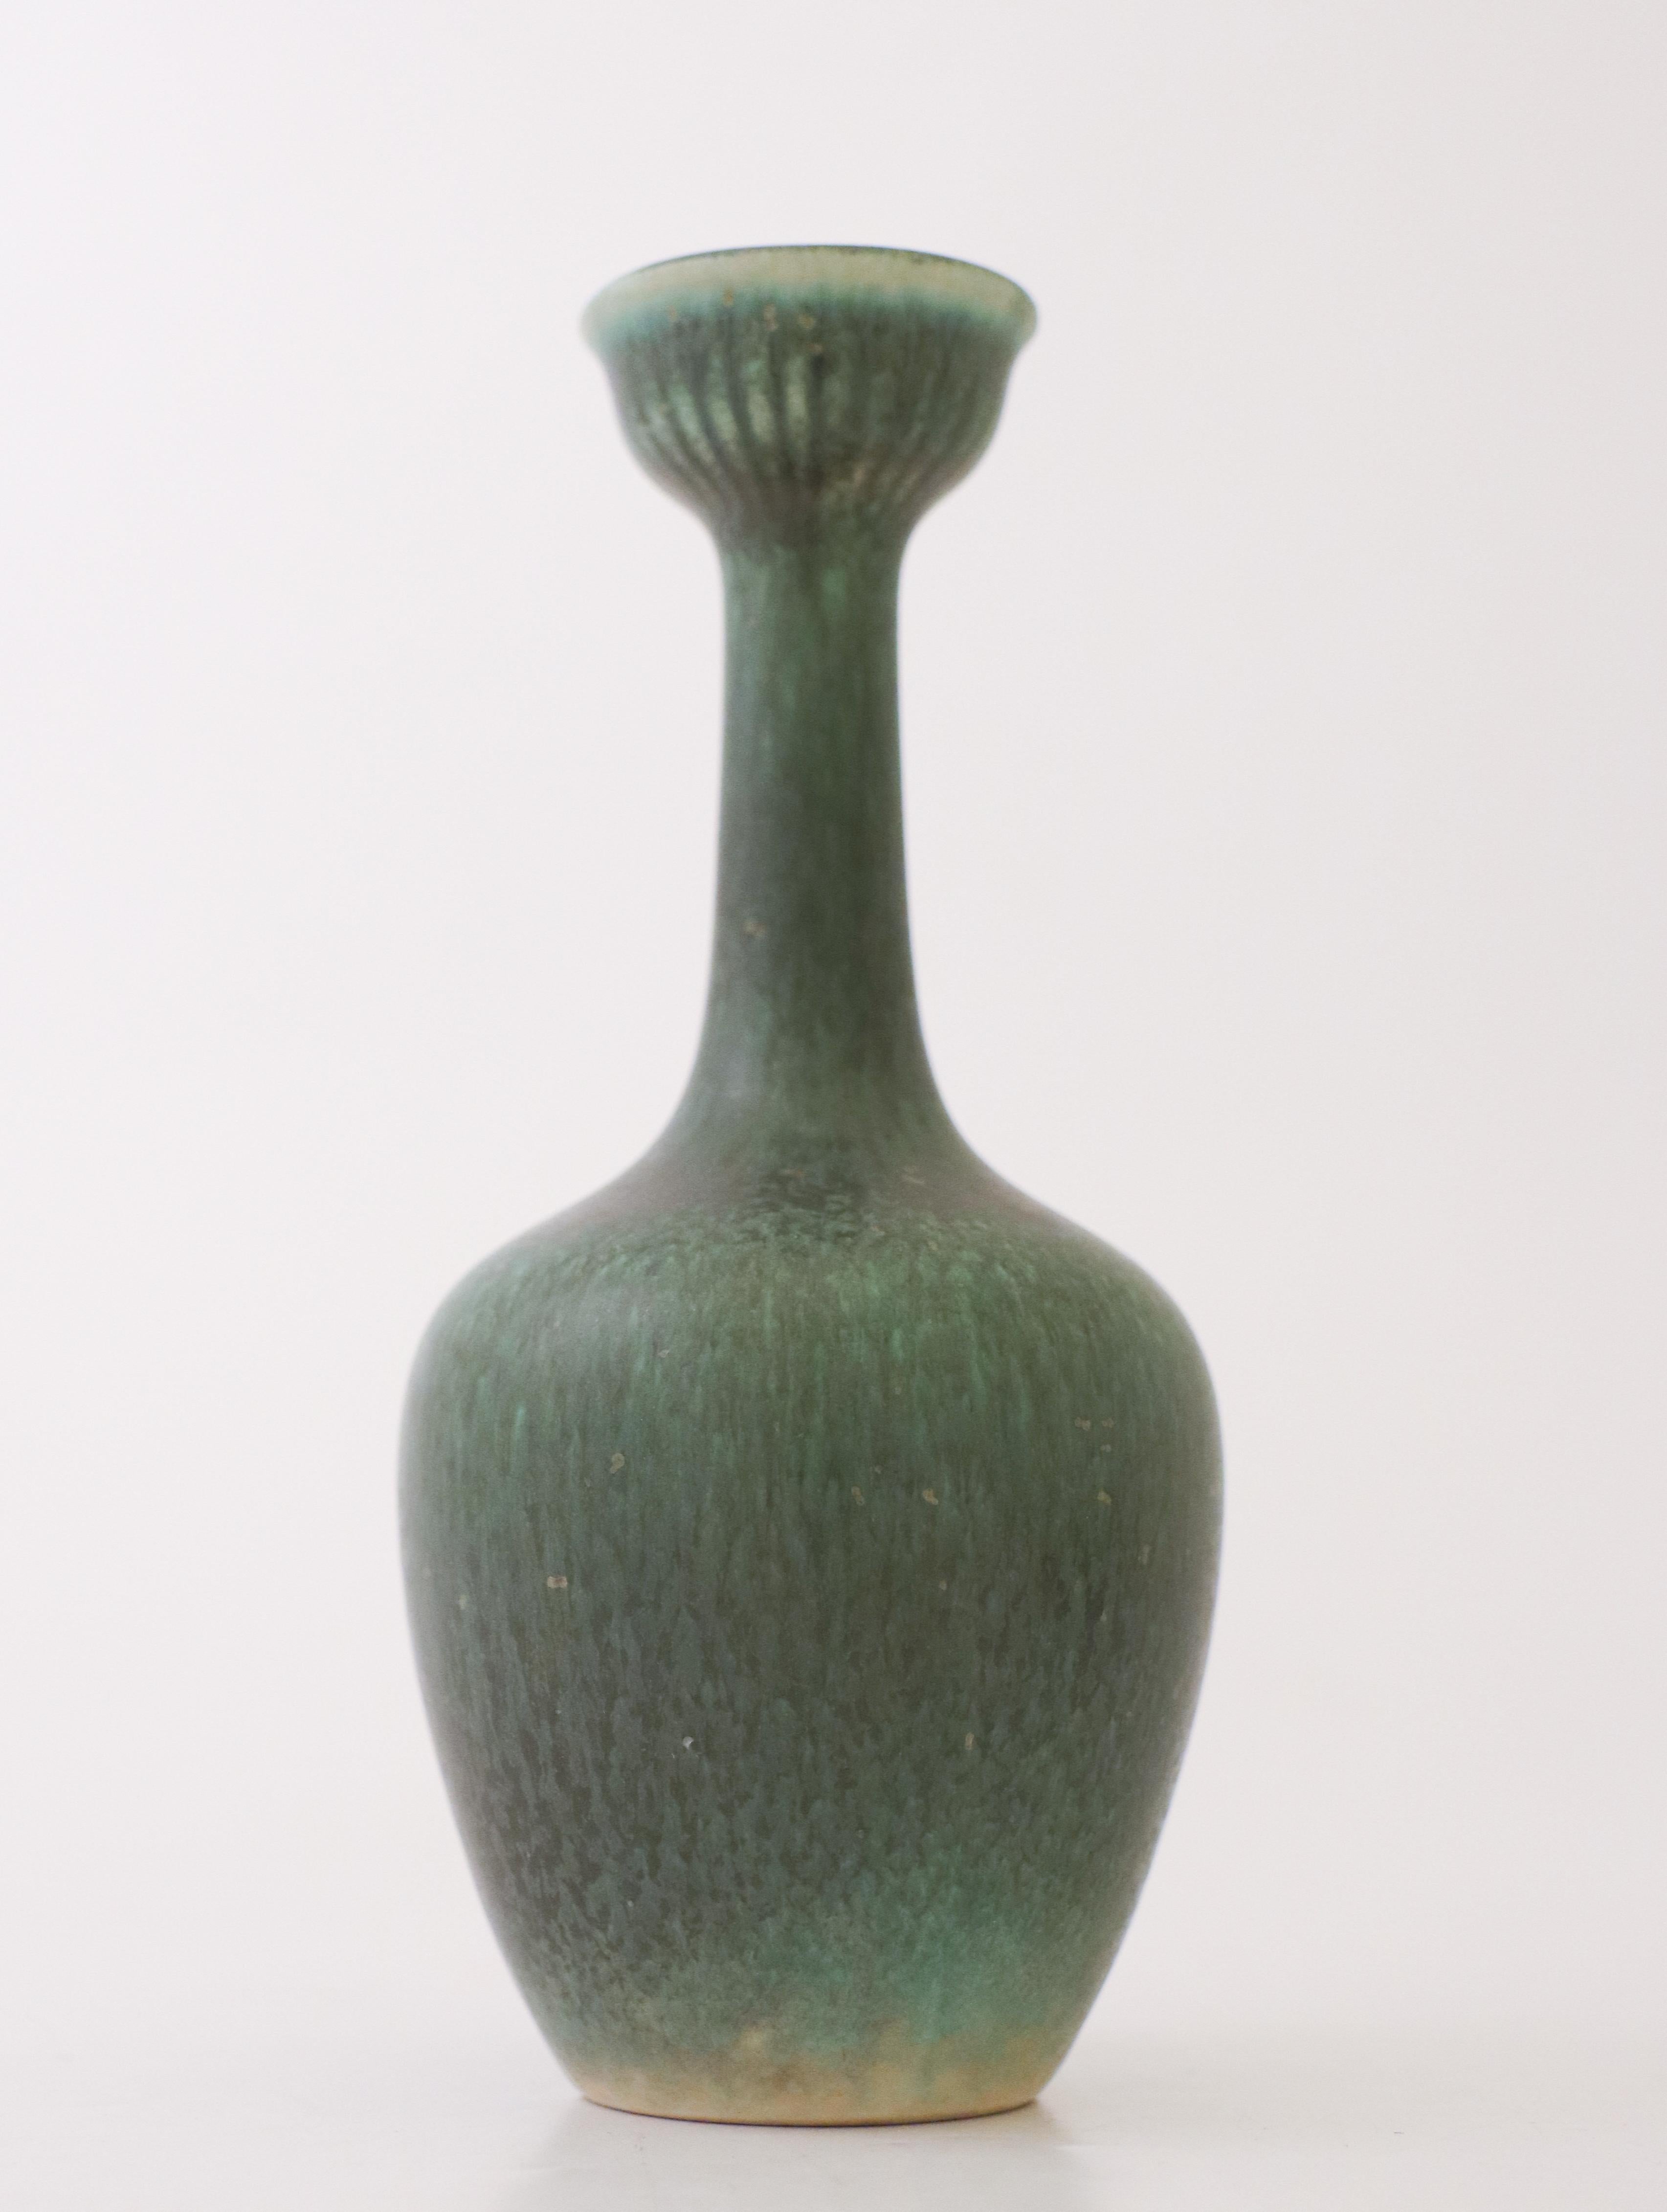 A vase with a lovely green glaze designed by Gunnar Nylund at Rörstrand, the vase is 14.5 cm (5.8